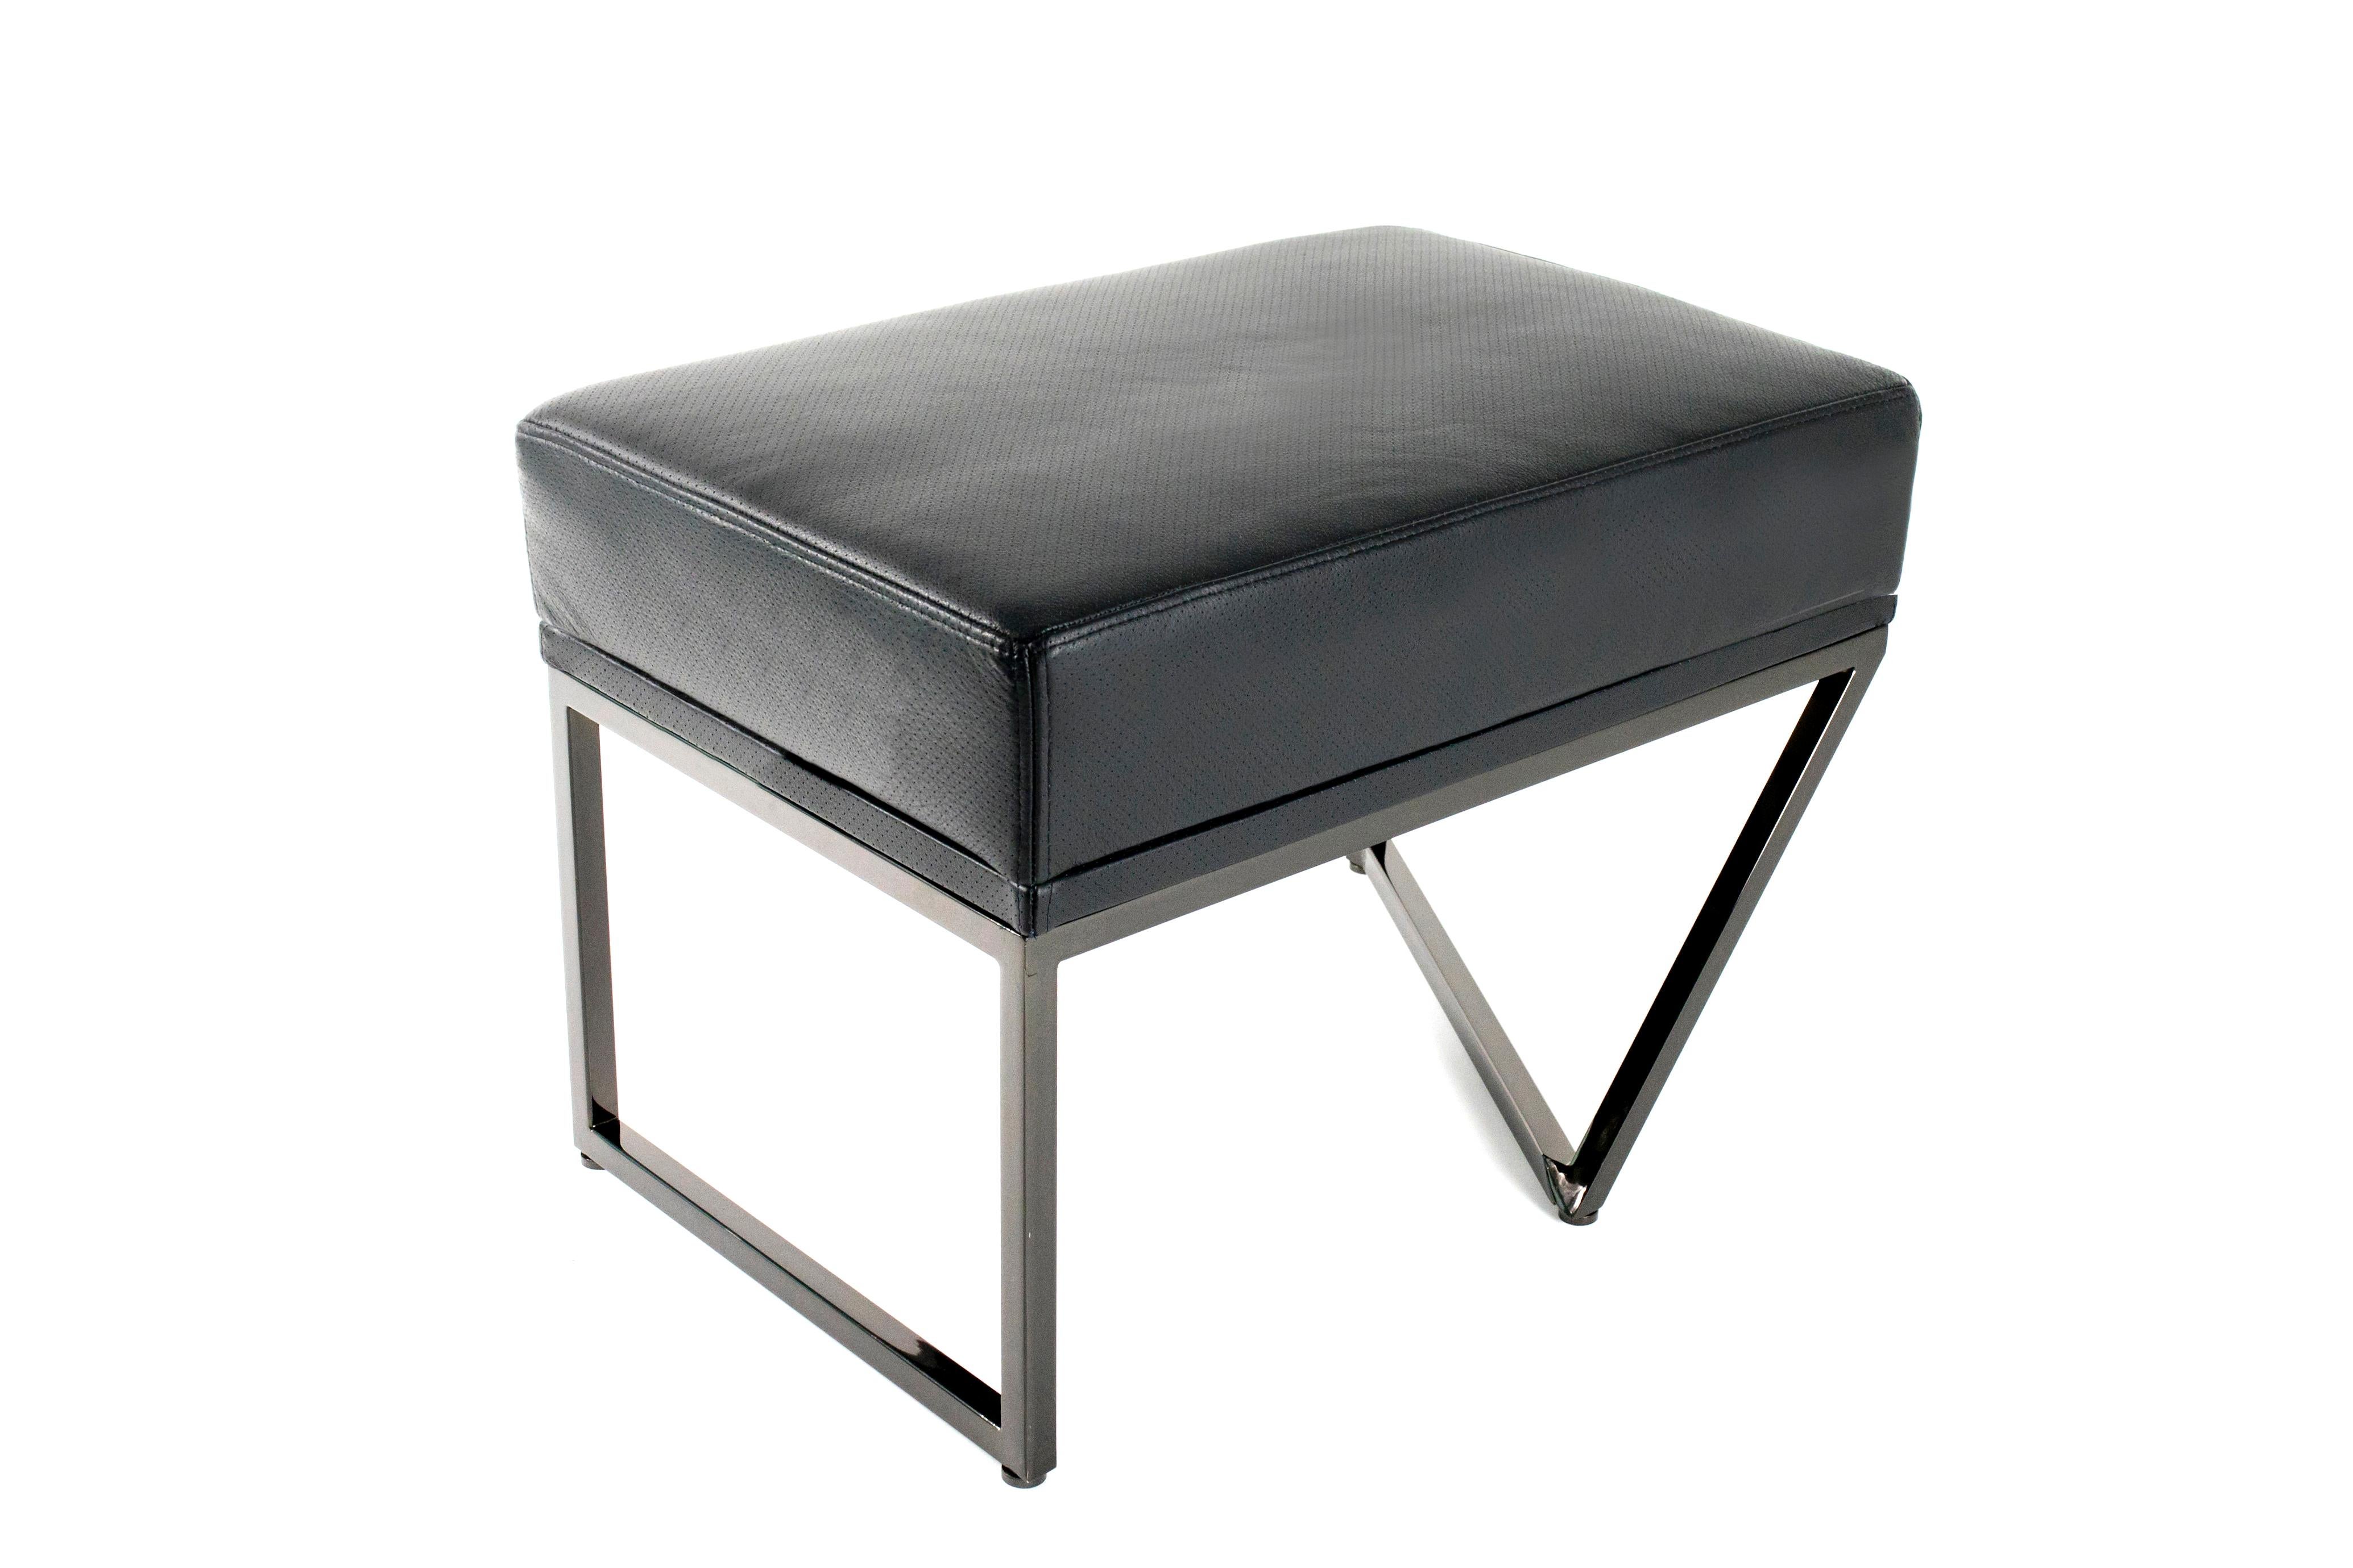 Spanish Upholstered Bench Black Nickel Plated For Sale